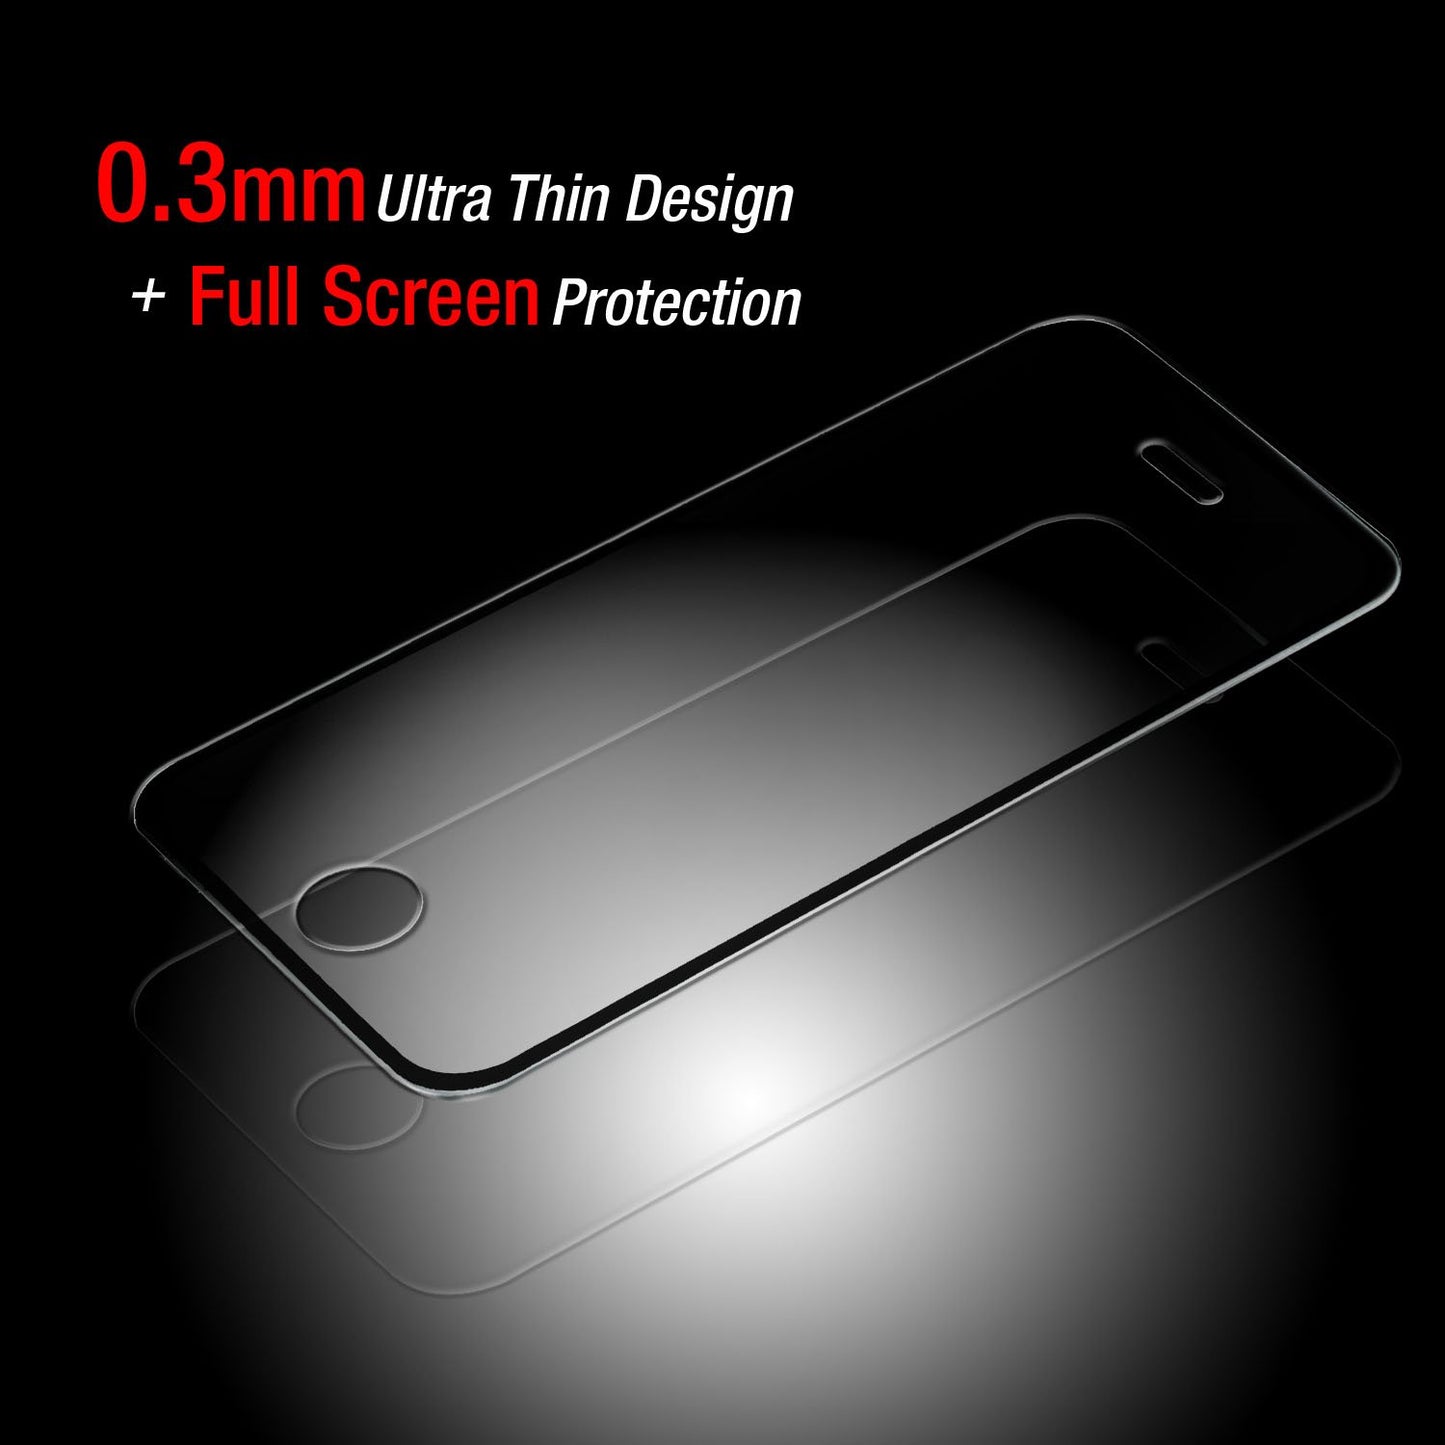 SGSAMS9PF- Full Coverage Screen Protector 9H Hardness Tempered Glass - Samsung Galaxy S9 Plus